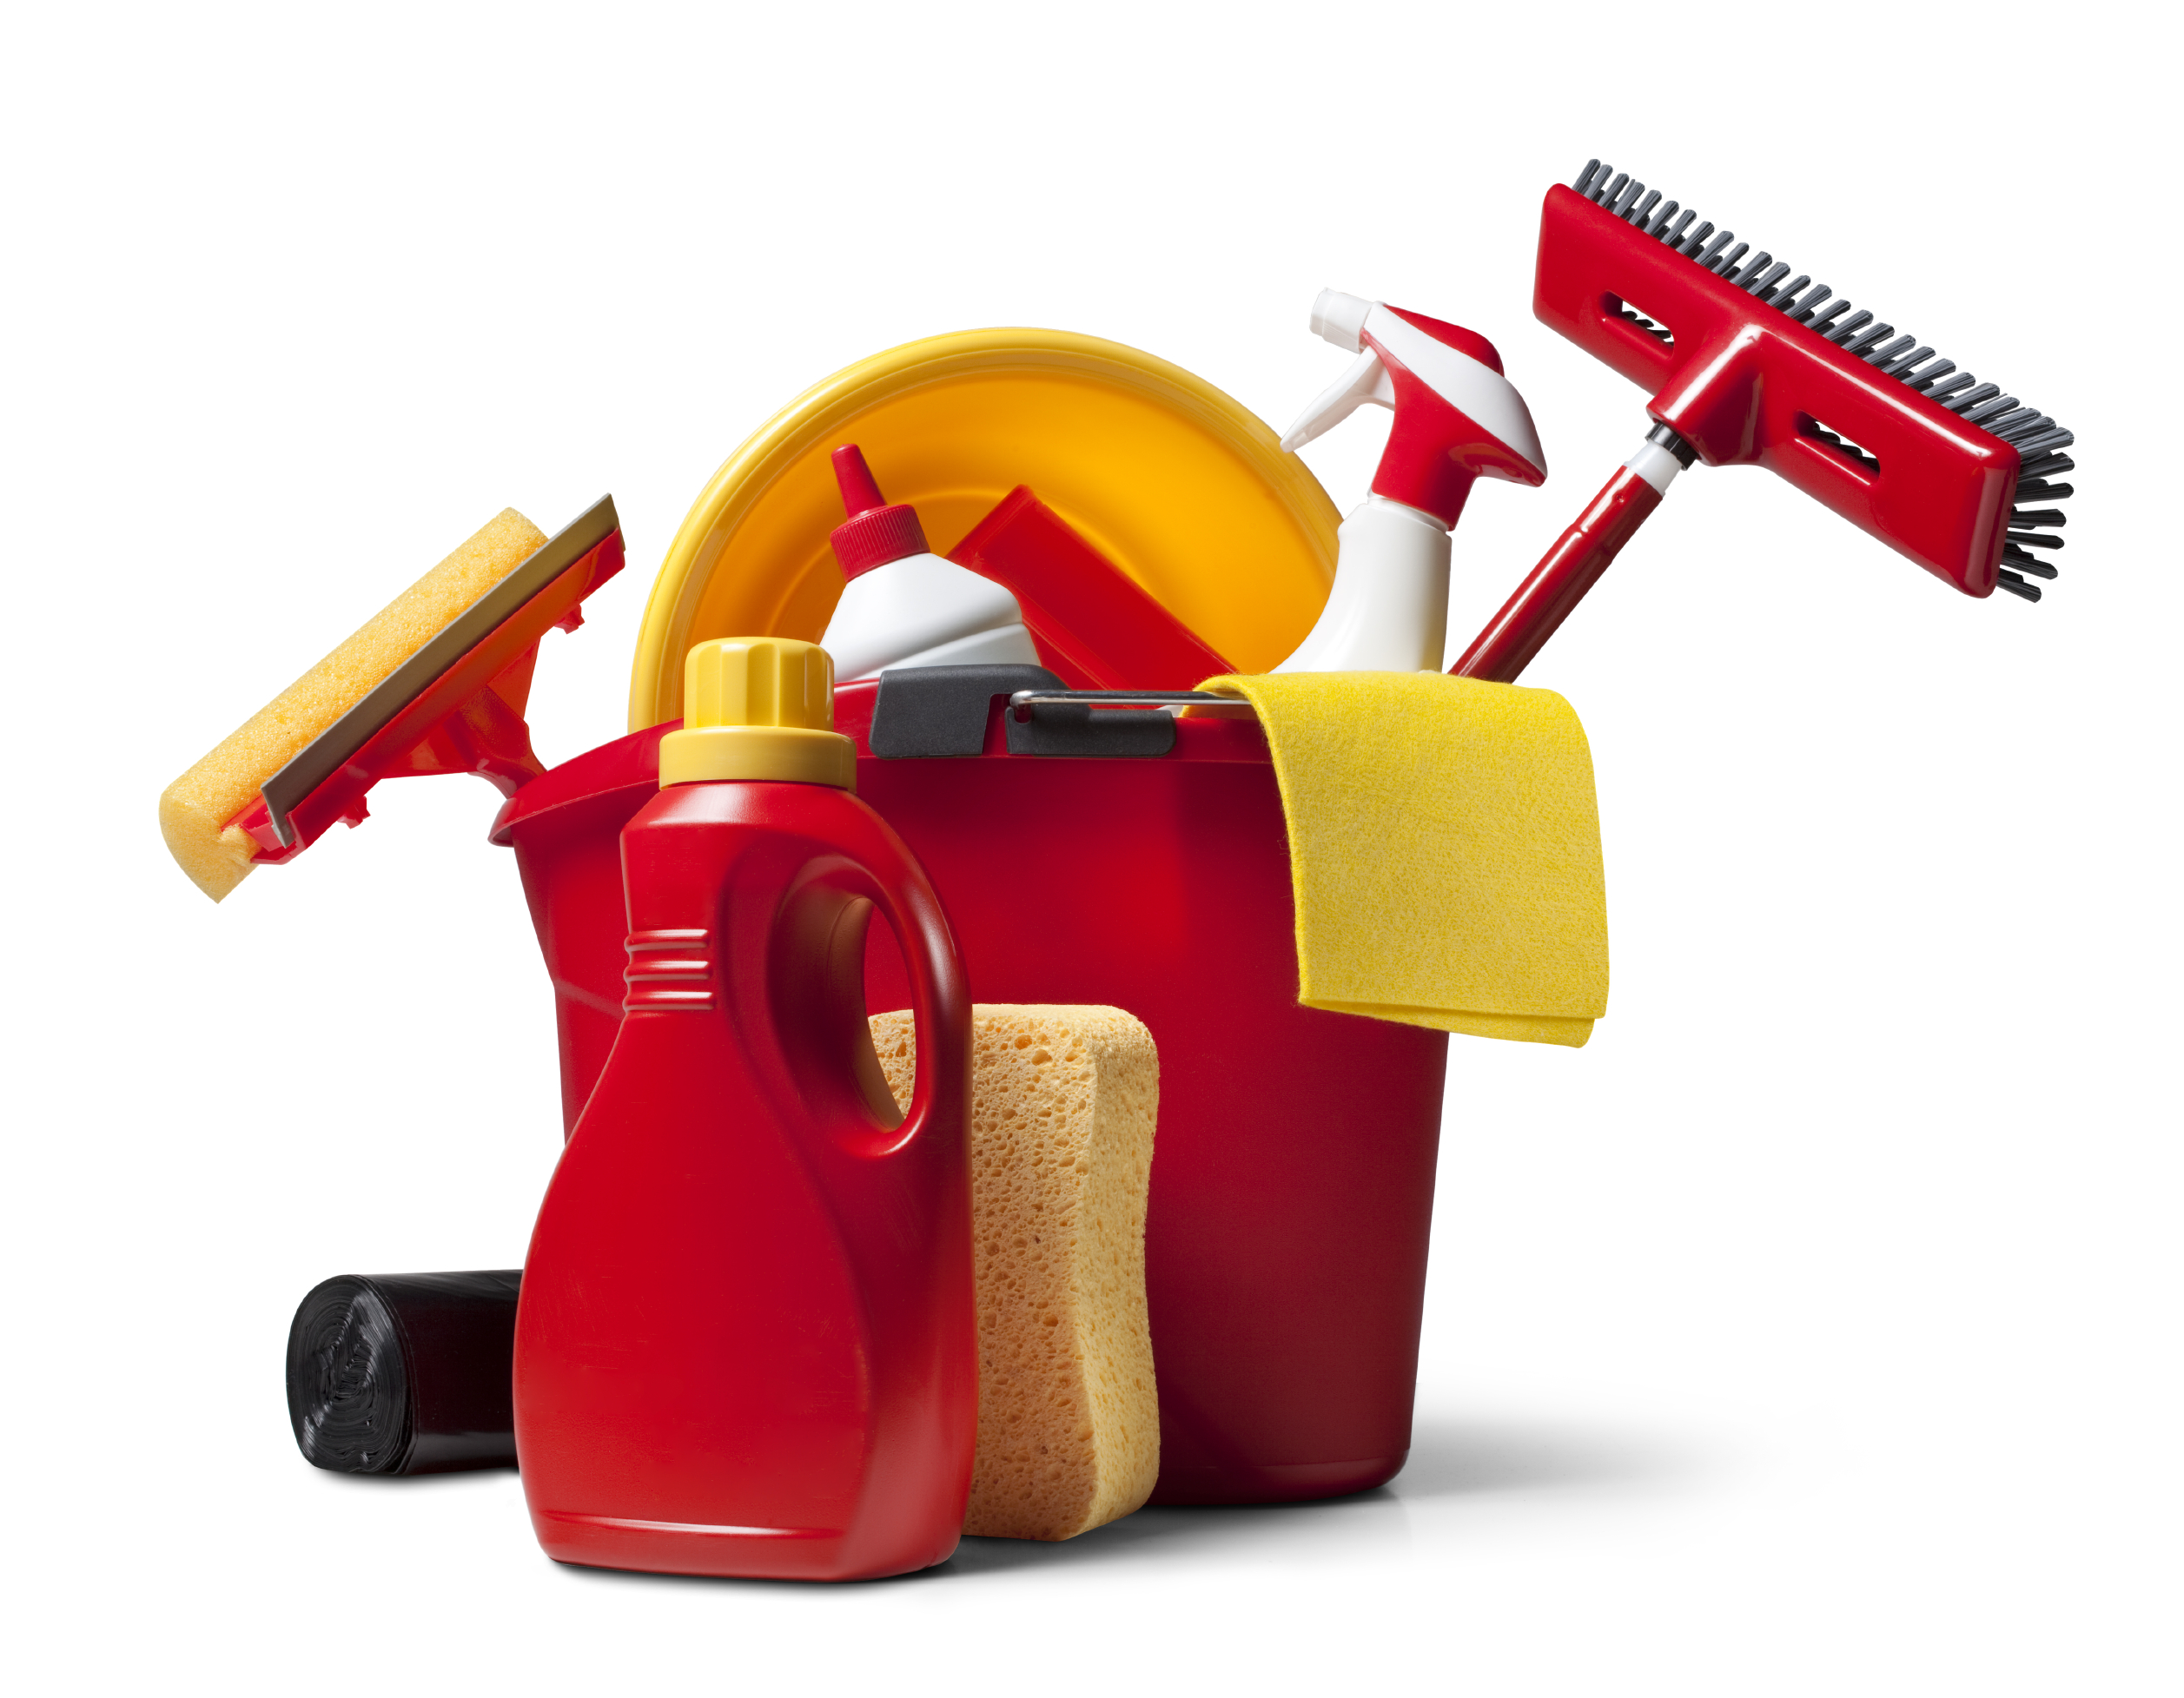 14 Cleaning Supplies Pictures Free Cliparts That You Can Download To